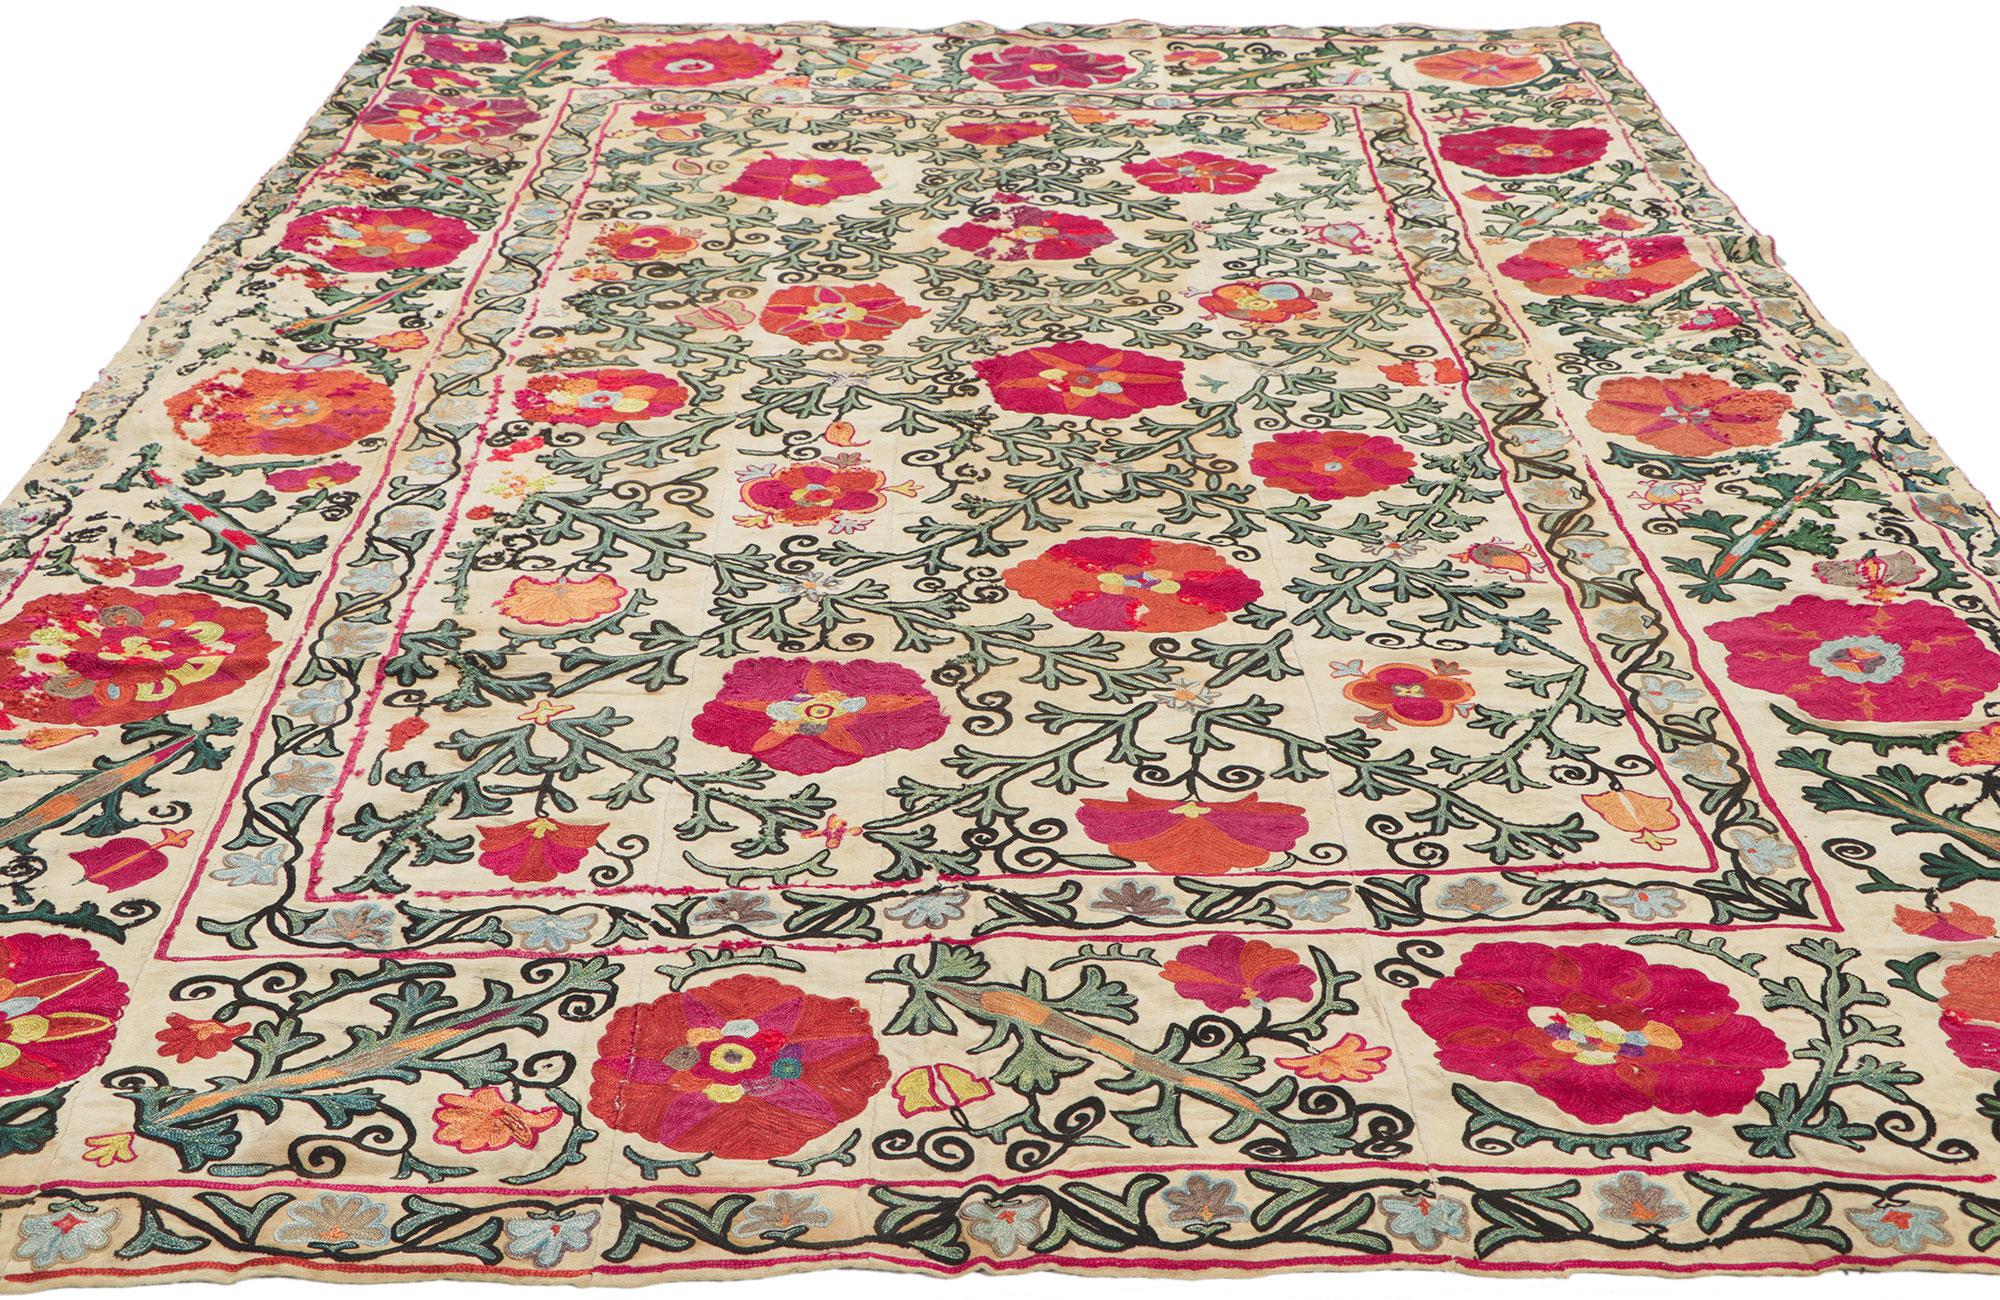 Hand-Woven Antique Uzbek Bukhara Suzani Textile, Embroidered Wall Tapestry For Sale